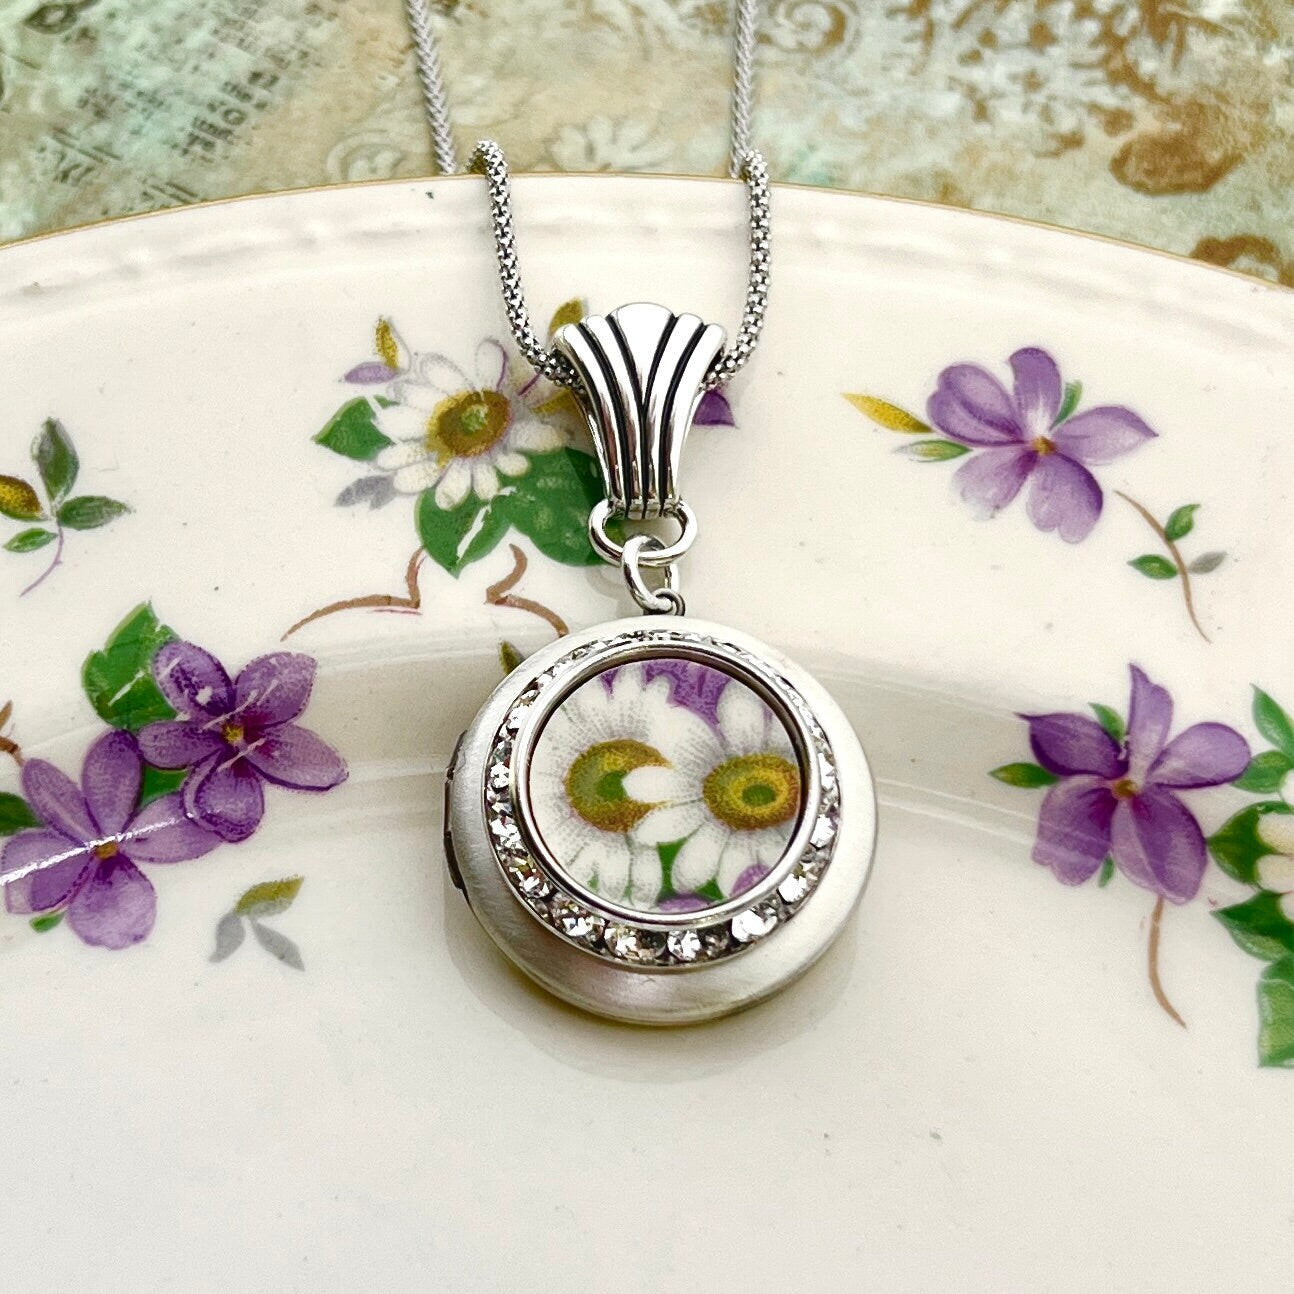 Adjustable Daisy Photo Locket, Unique Crystal Jewelry, Vintage China Locket Necklace, Romantic Gifts for Women